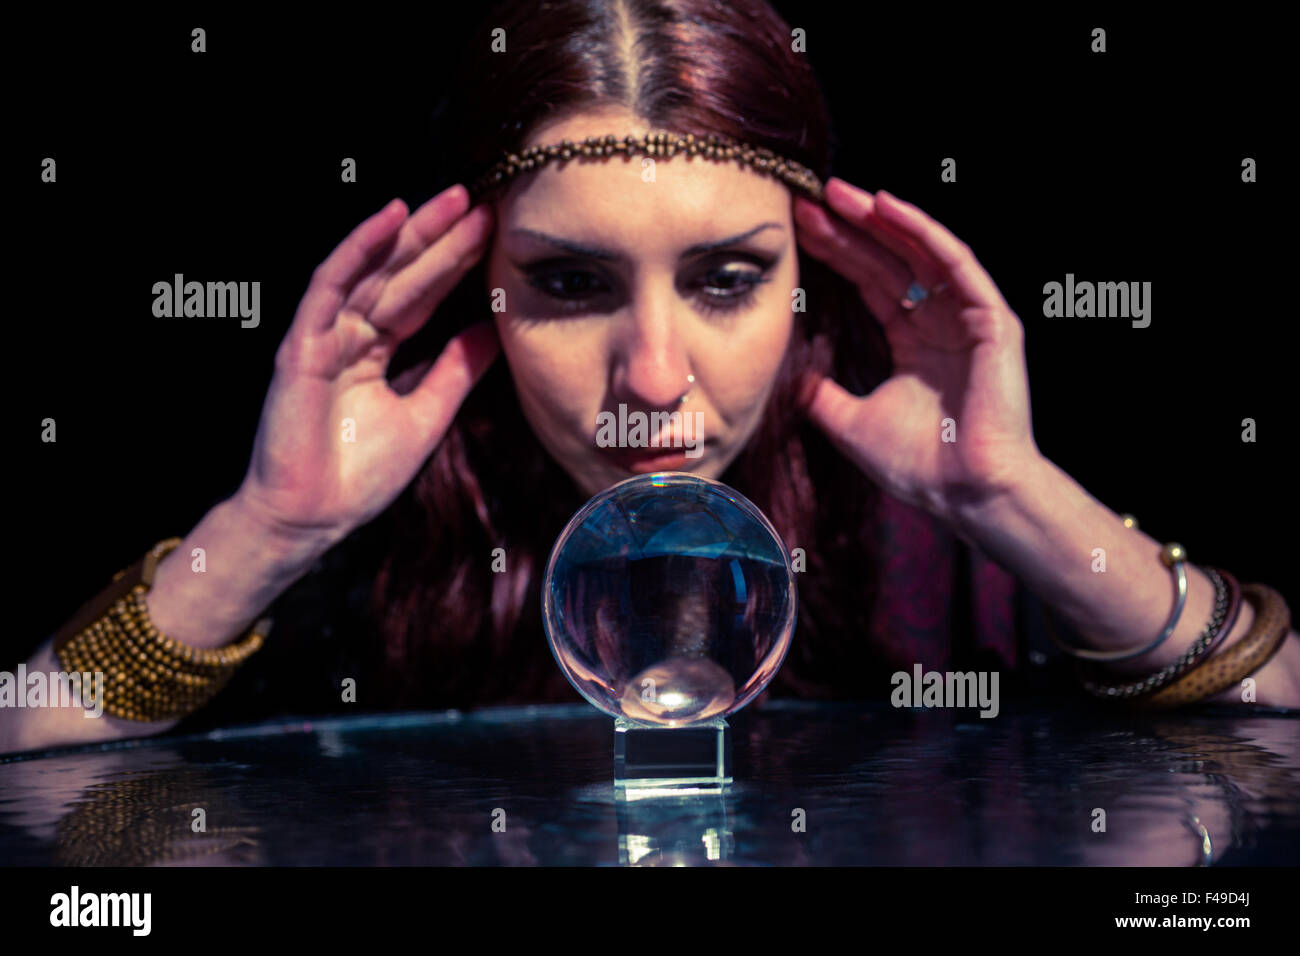 Serious fortune teller looking at crystal ball Stock Photo